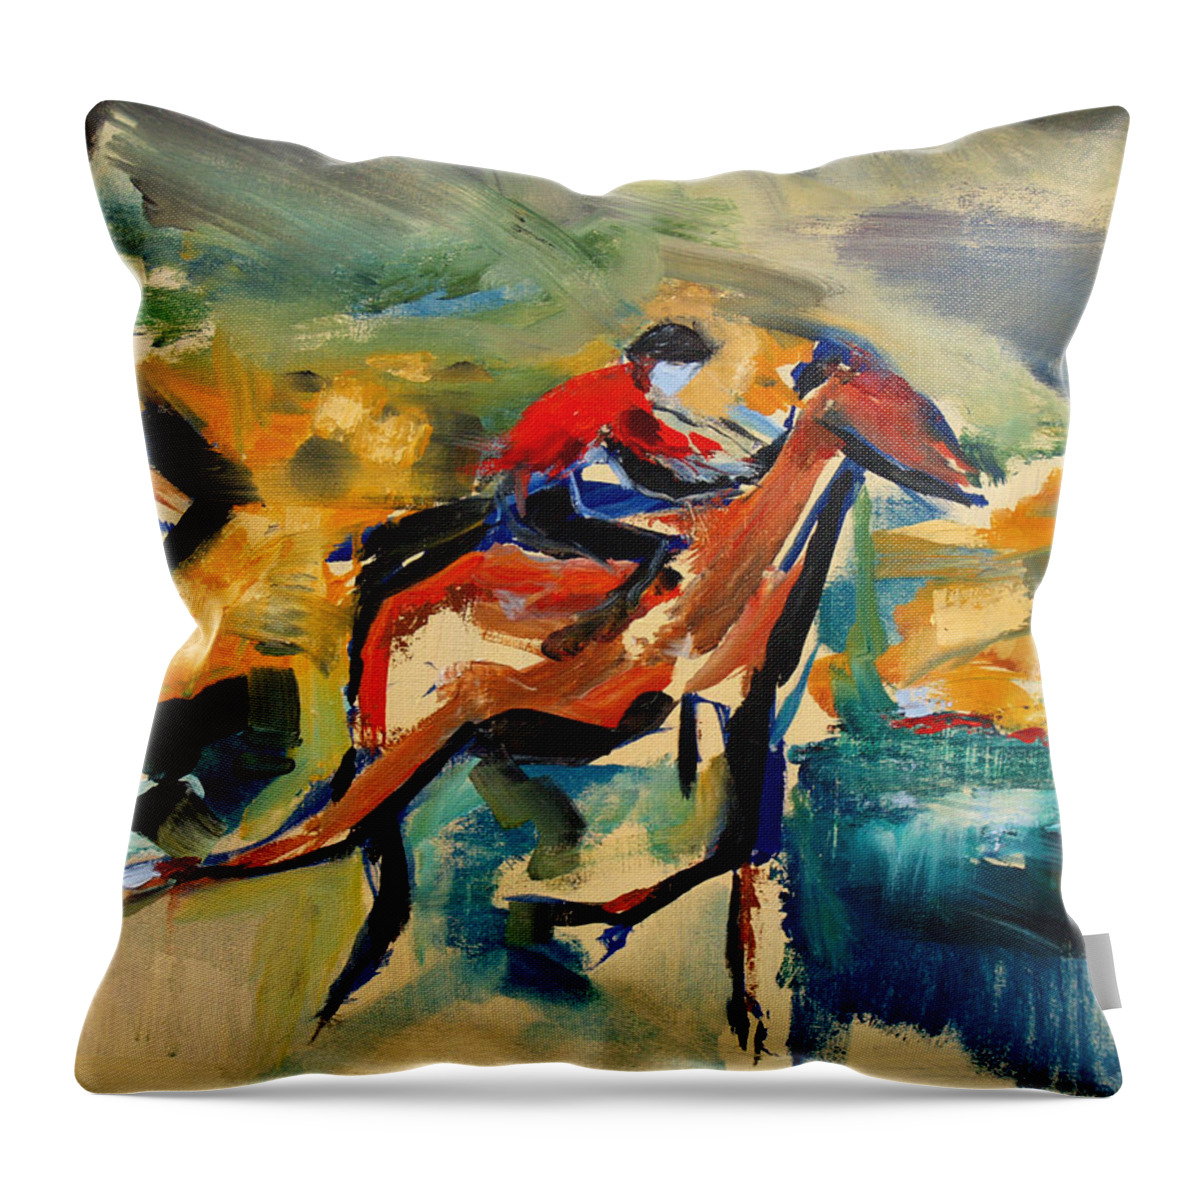  Throw Pillow featuring the painting Red Jacket by John Gholson